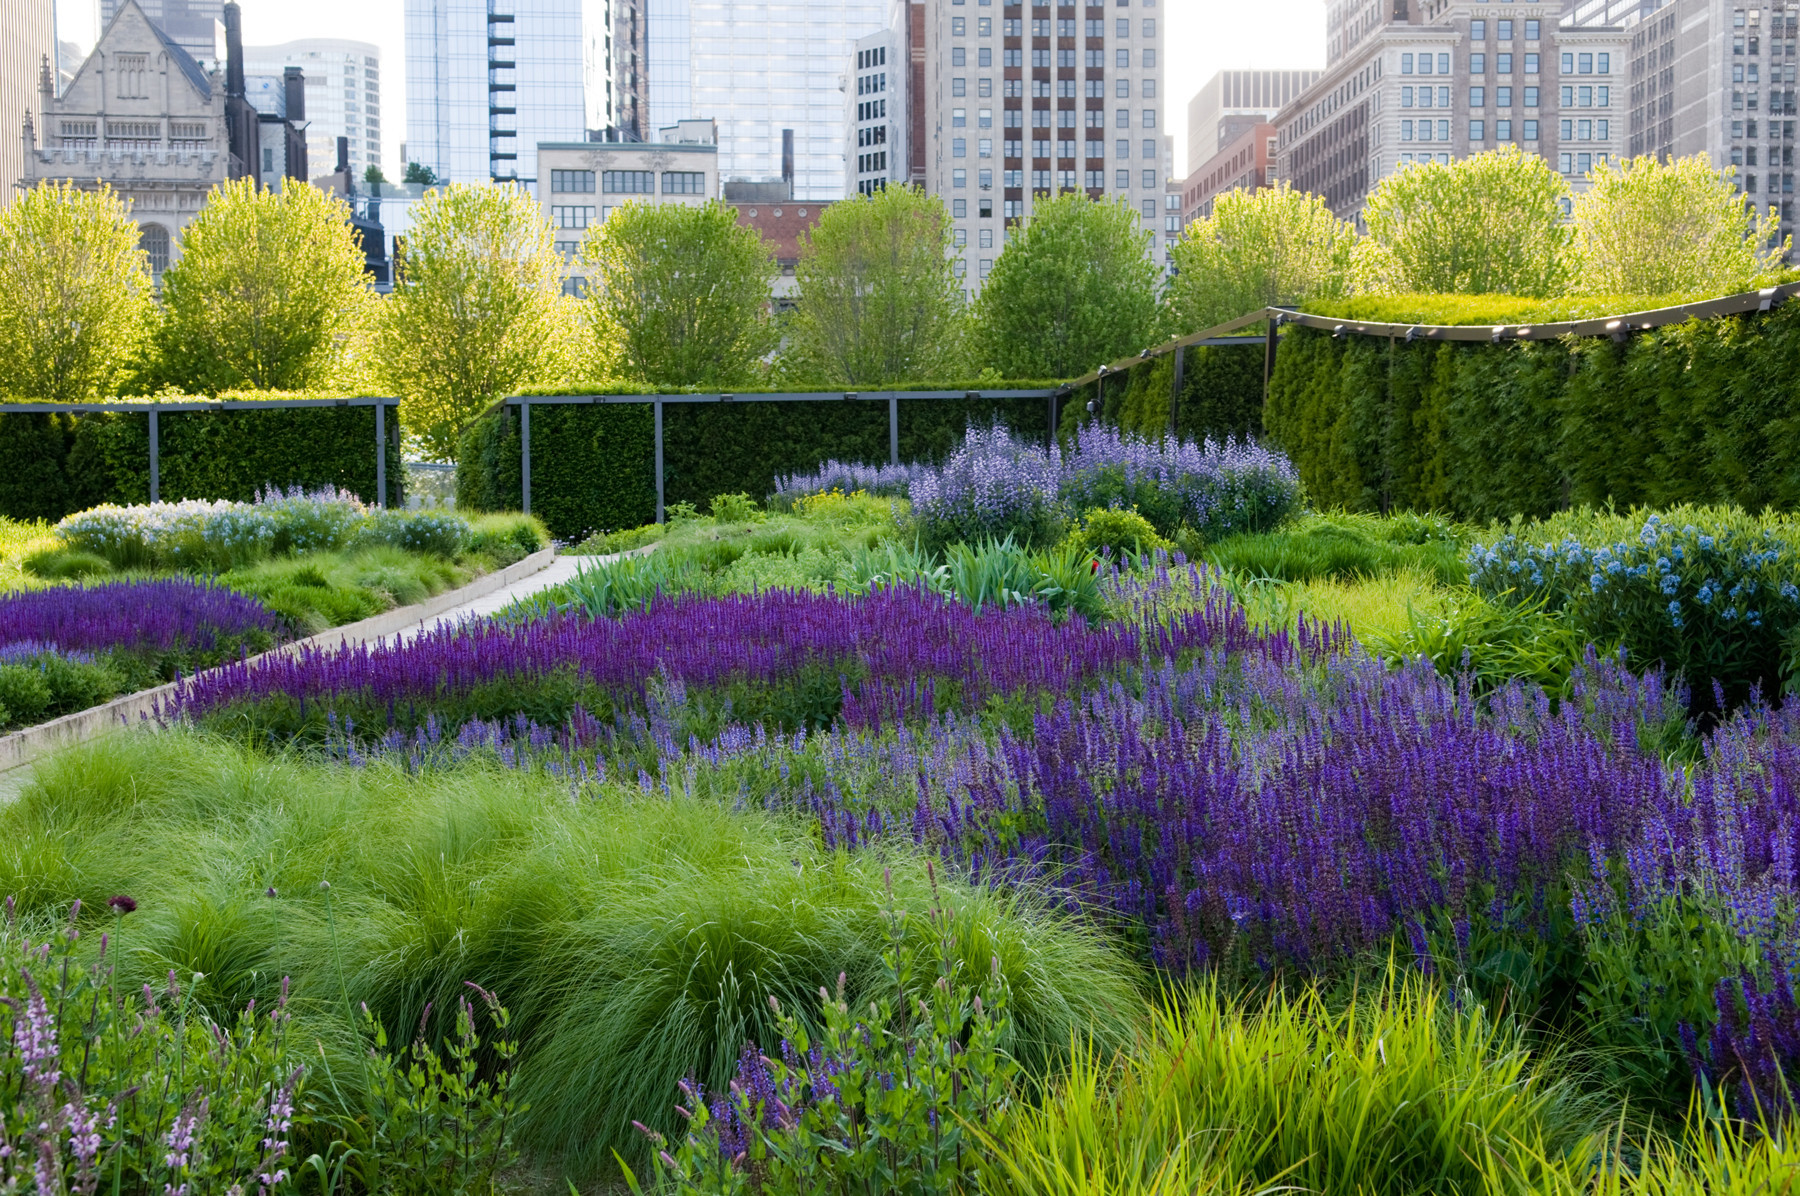 Innovative technology and thinking help urban parks evolve - Chicago